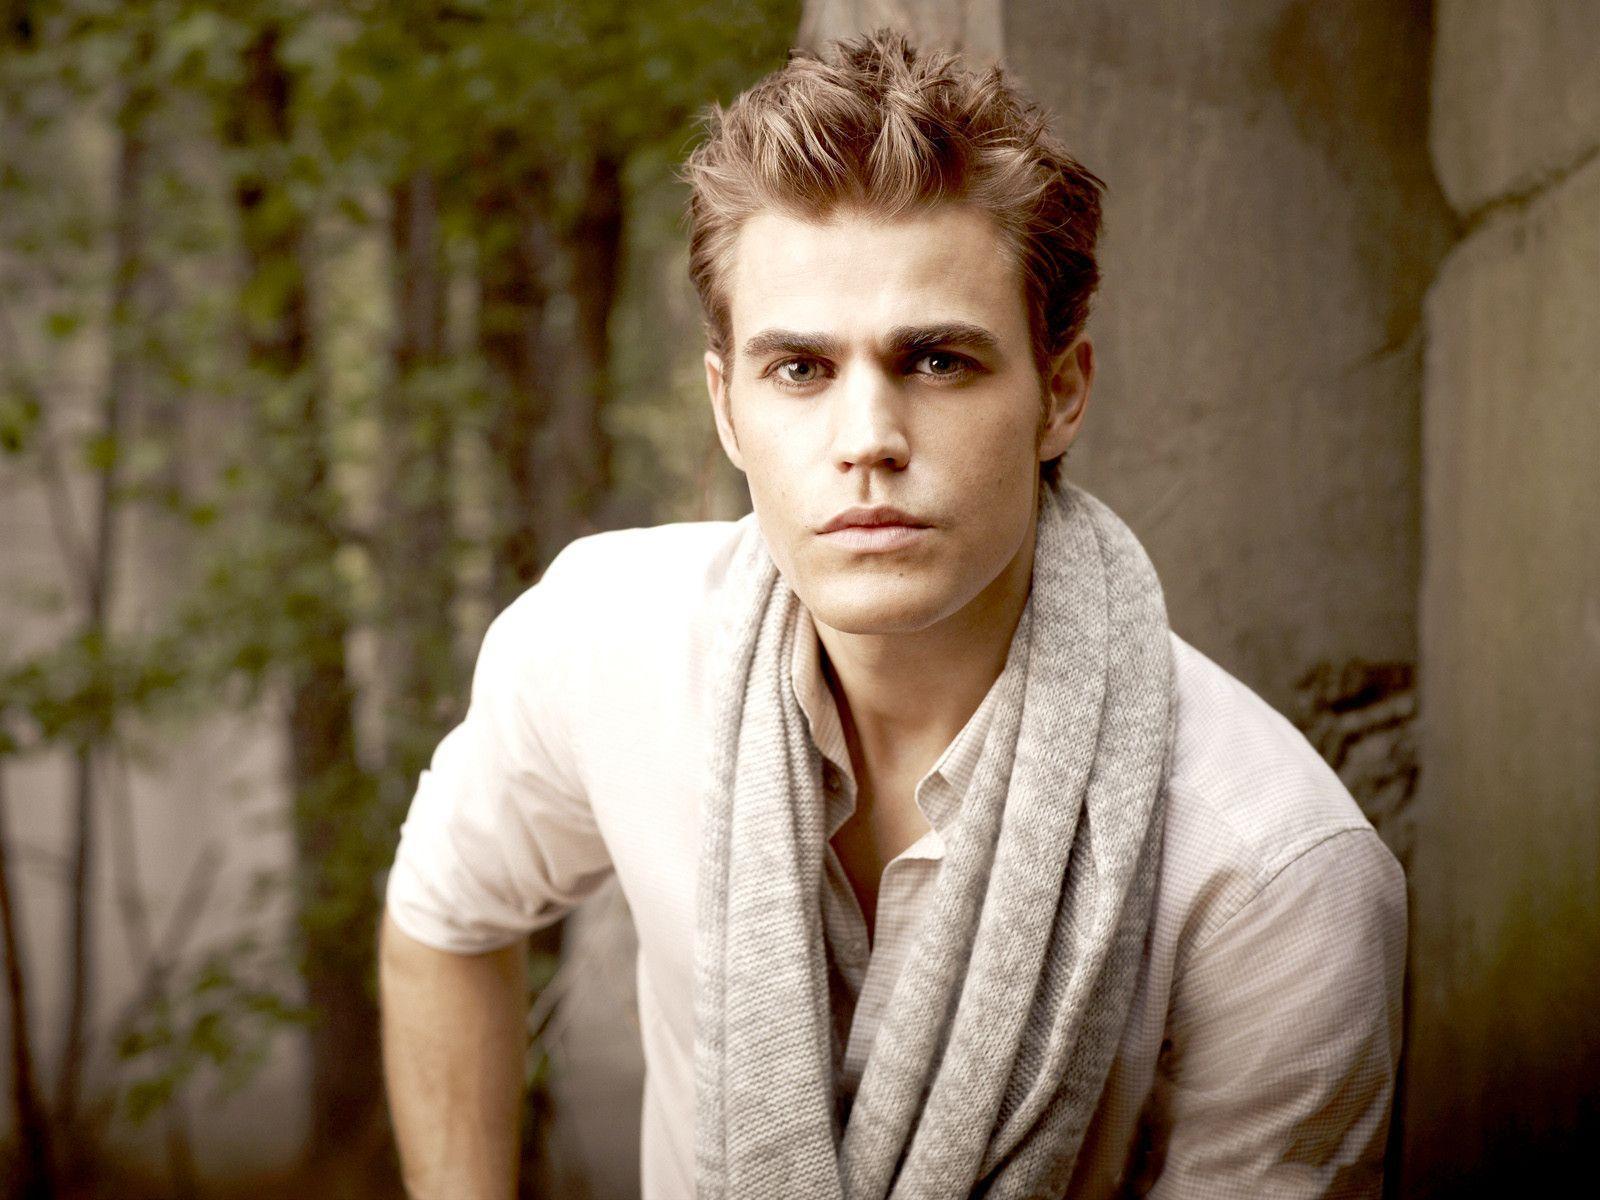 Paul Wesley Image Wallpaper 18827 High Resolution. download all